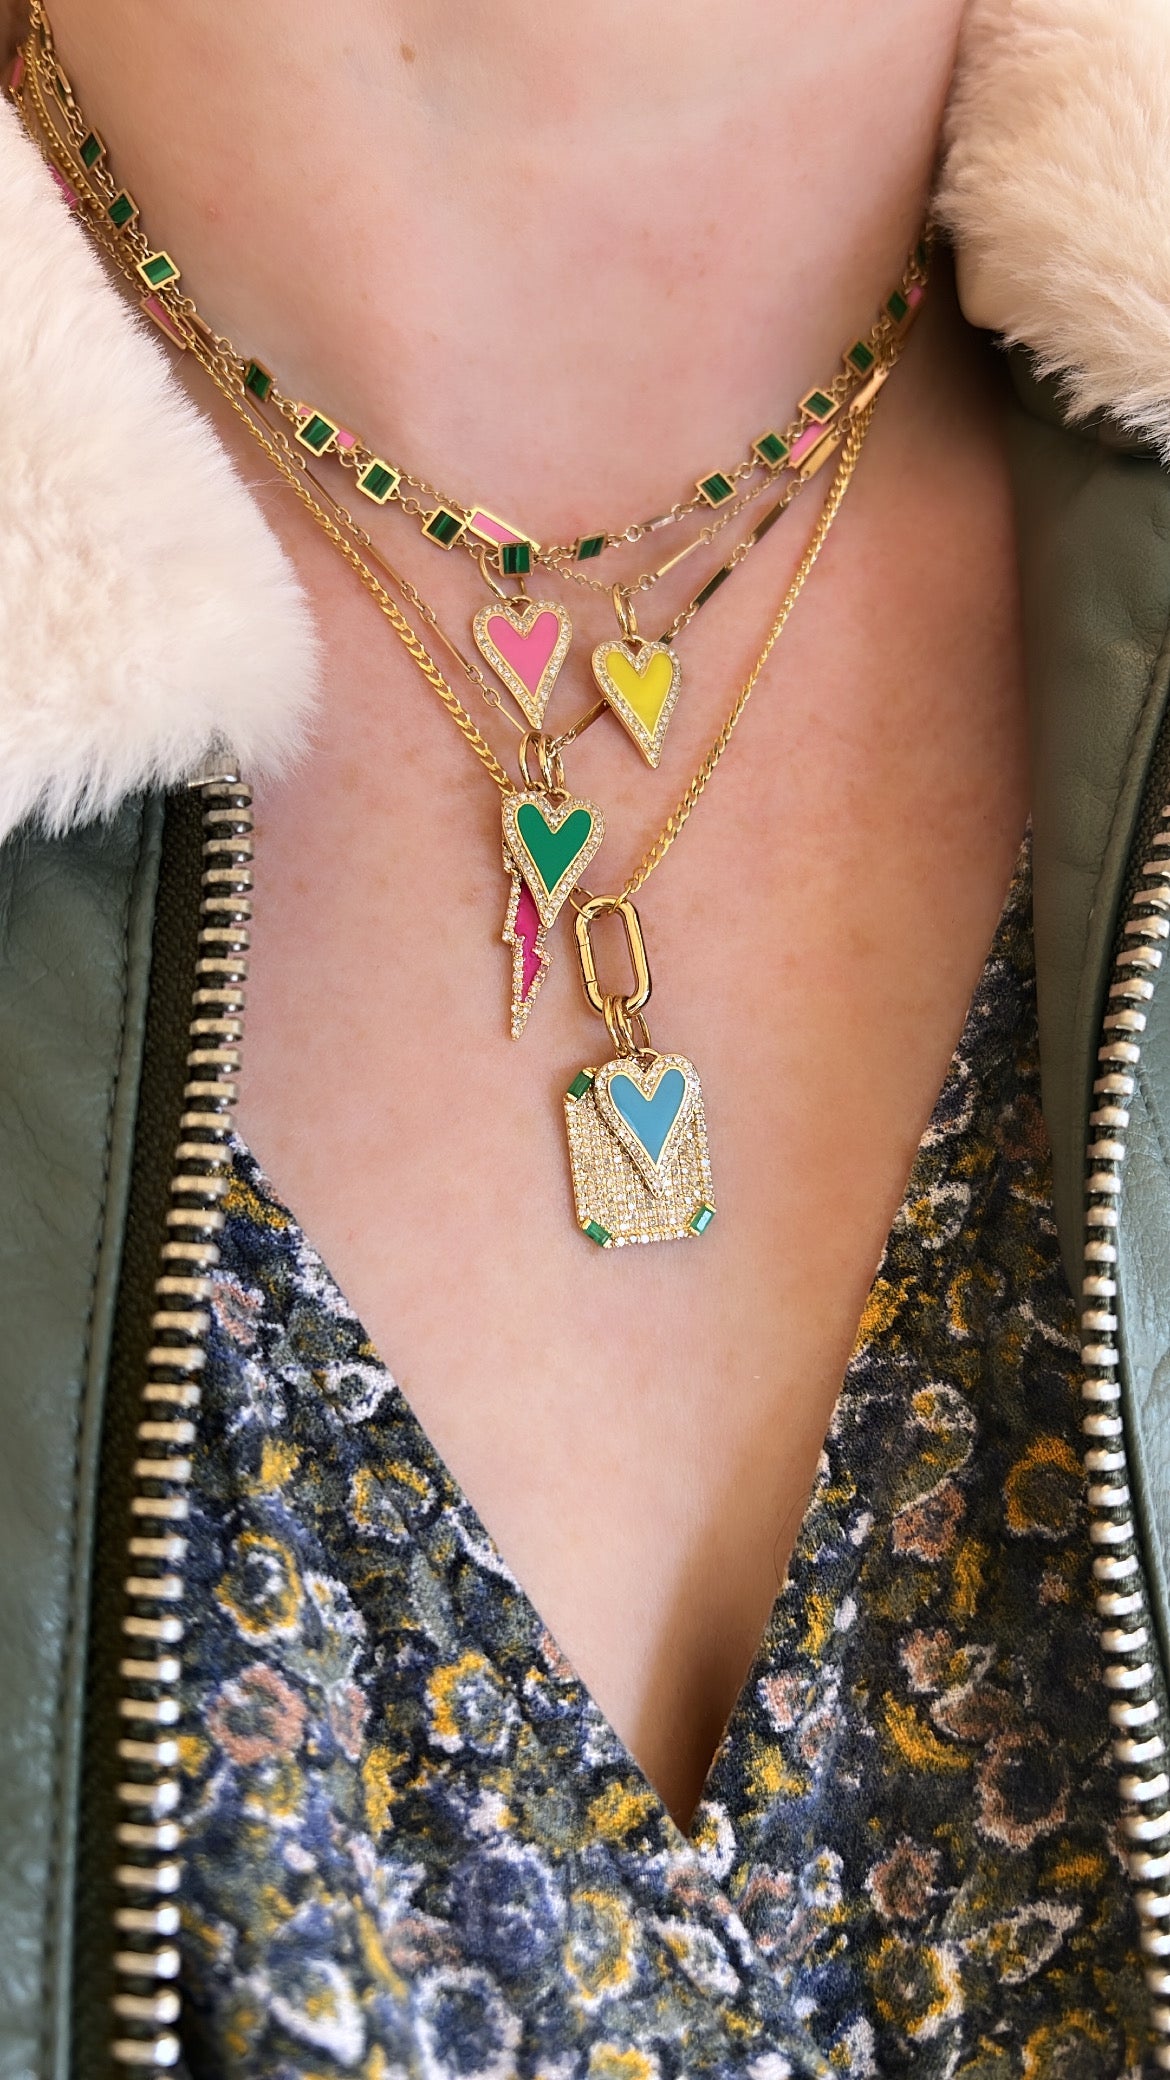 Charm, gold plated: Cactus with green cold enamel